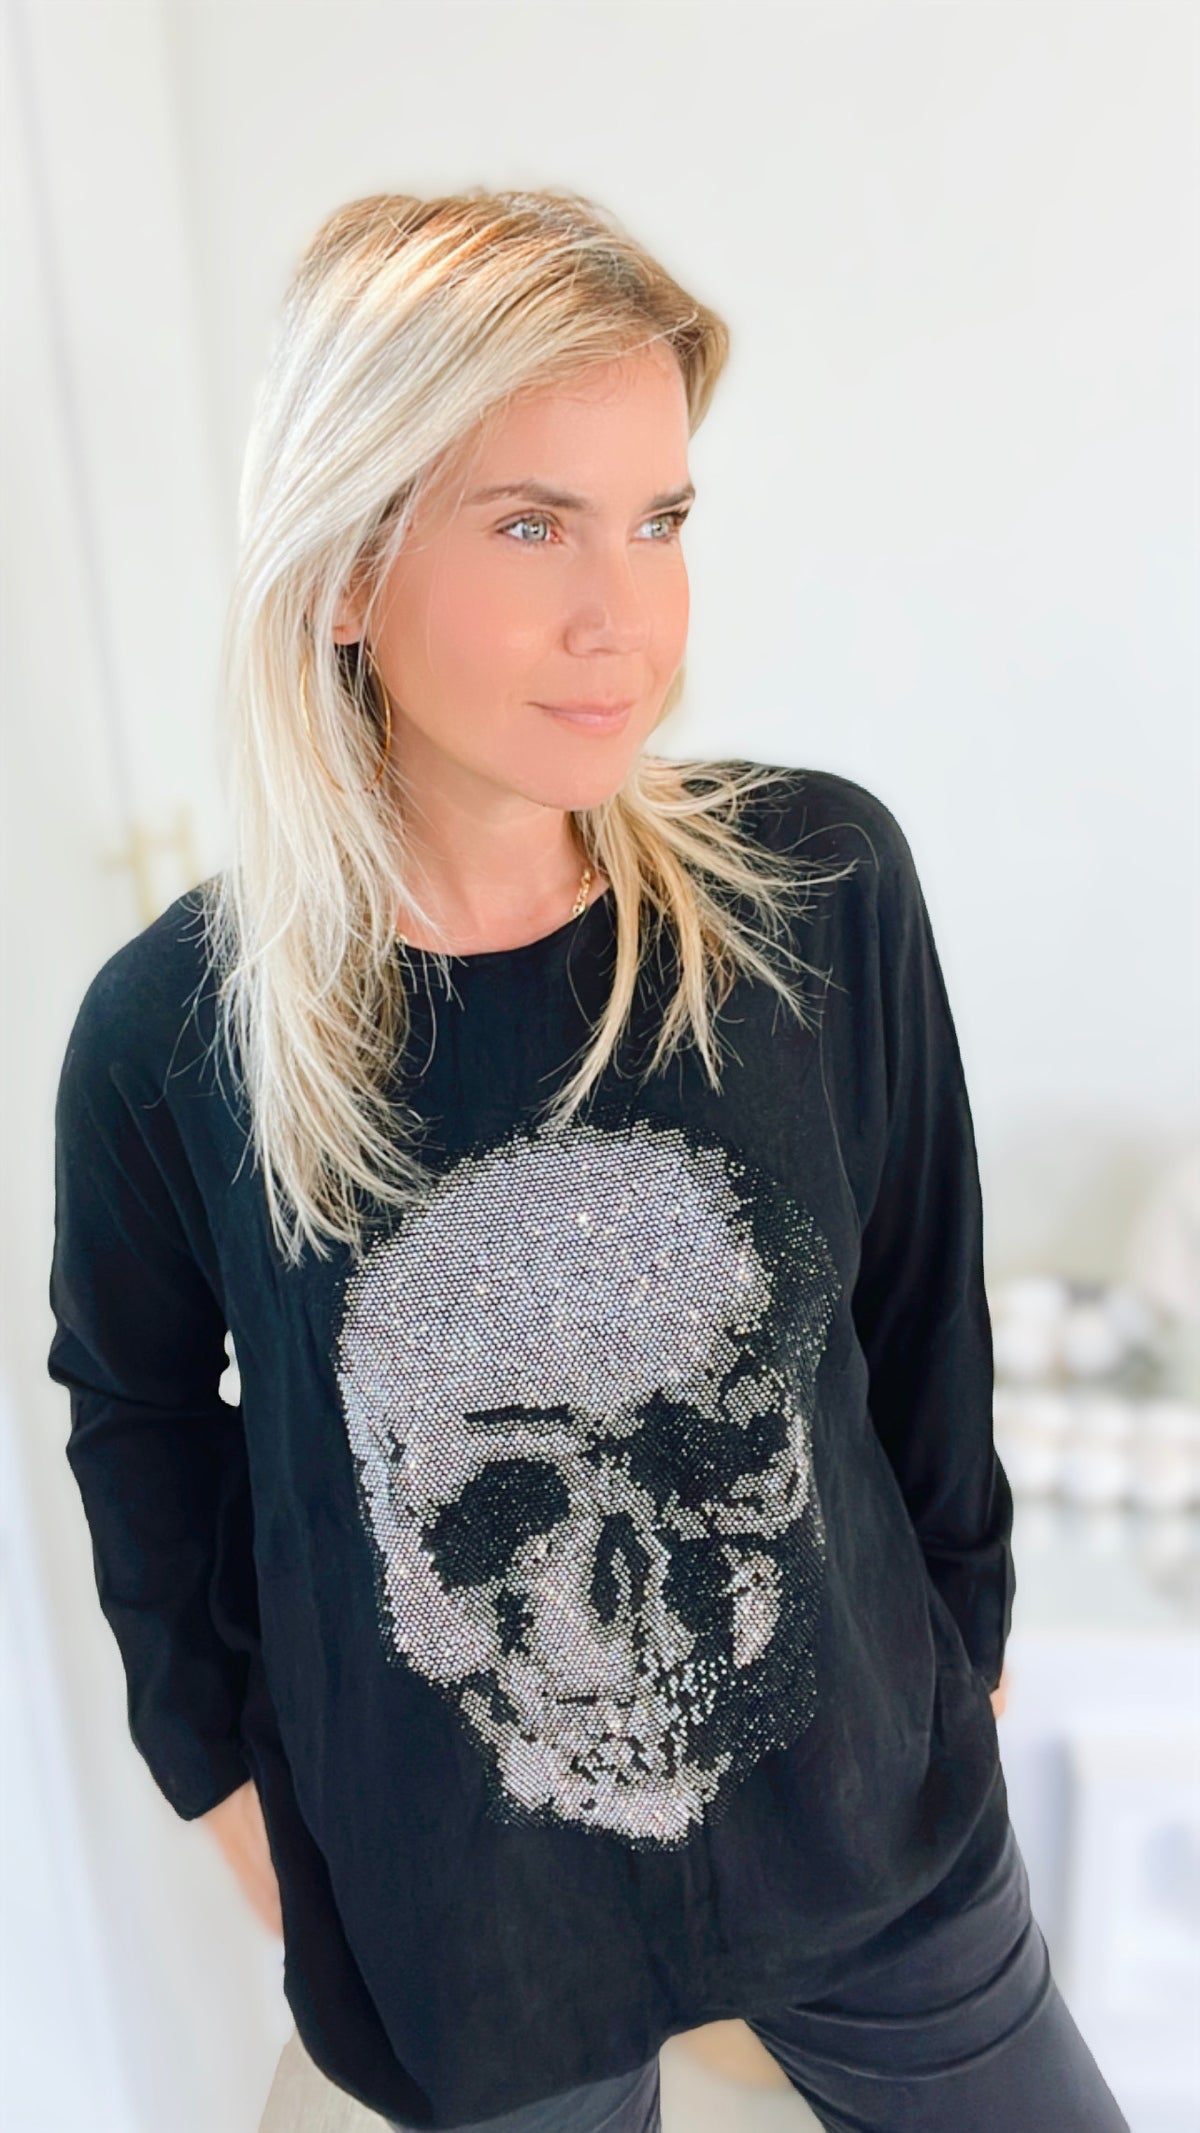 Italian Boatneck Skull Sweater Top - Black-140 Sweaters-Venti6-Coastal Bloom Boutique, find the trendiest versions of the popular styles and looks Located in Indialantic, FL